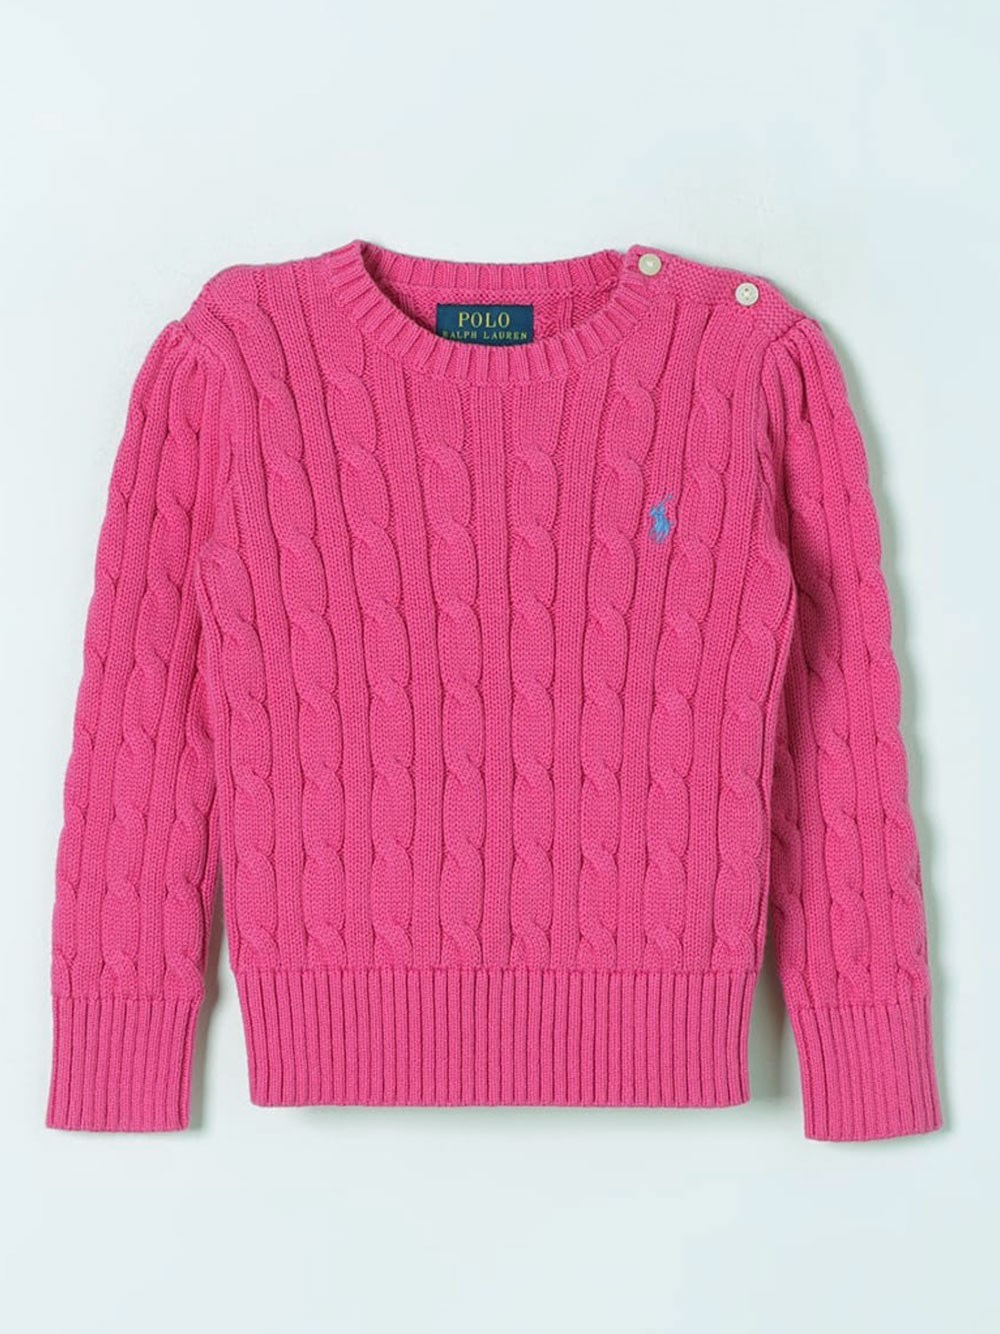 Ralph Lauren Kids' Polo Pony Cable-knit Jumper In Pink & Purple